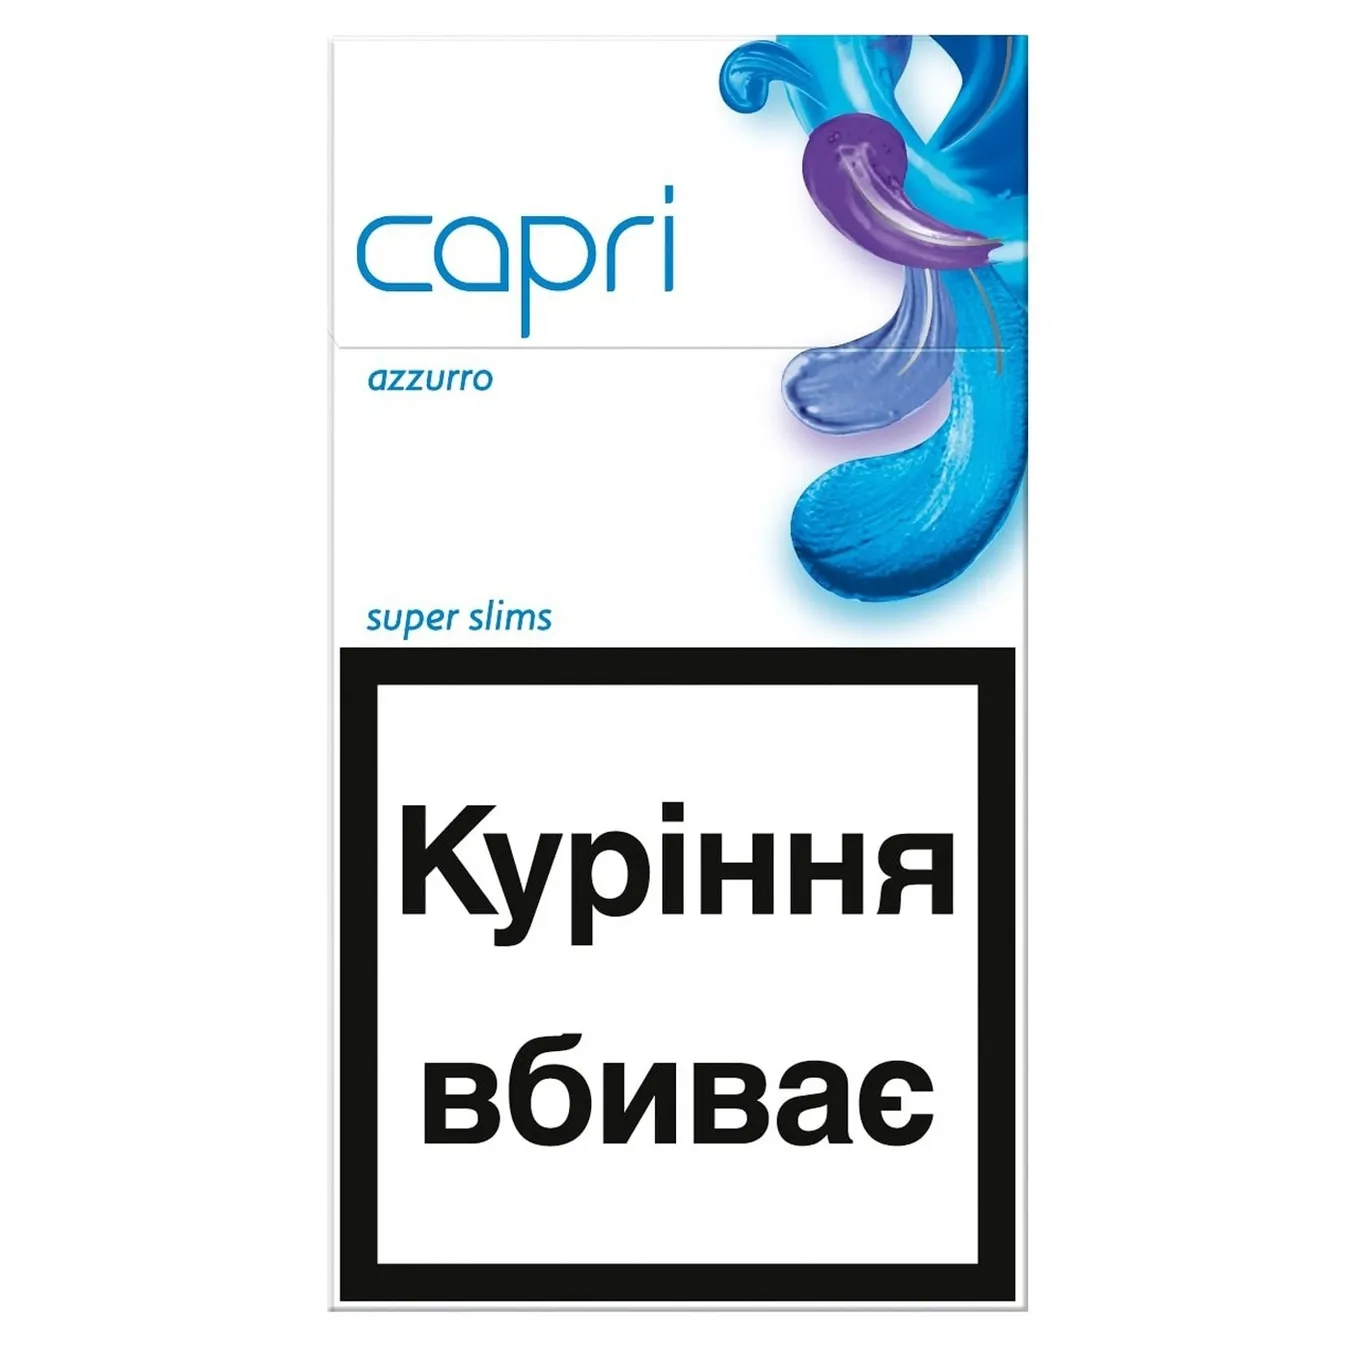 Capri Azzurro cigarettes 20 pcs (the price is indicated without excise tax)